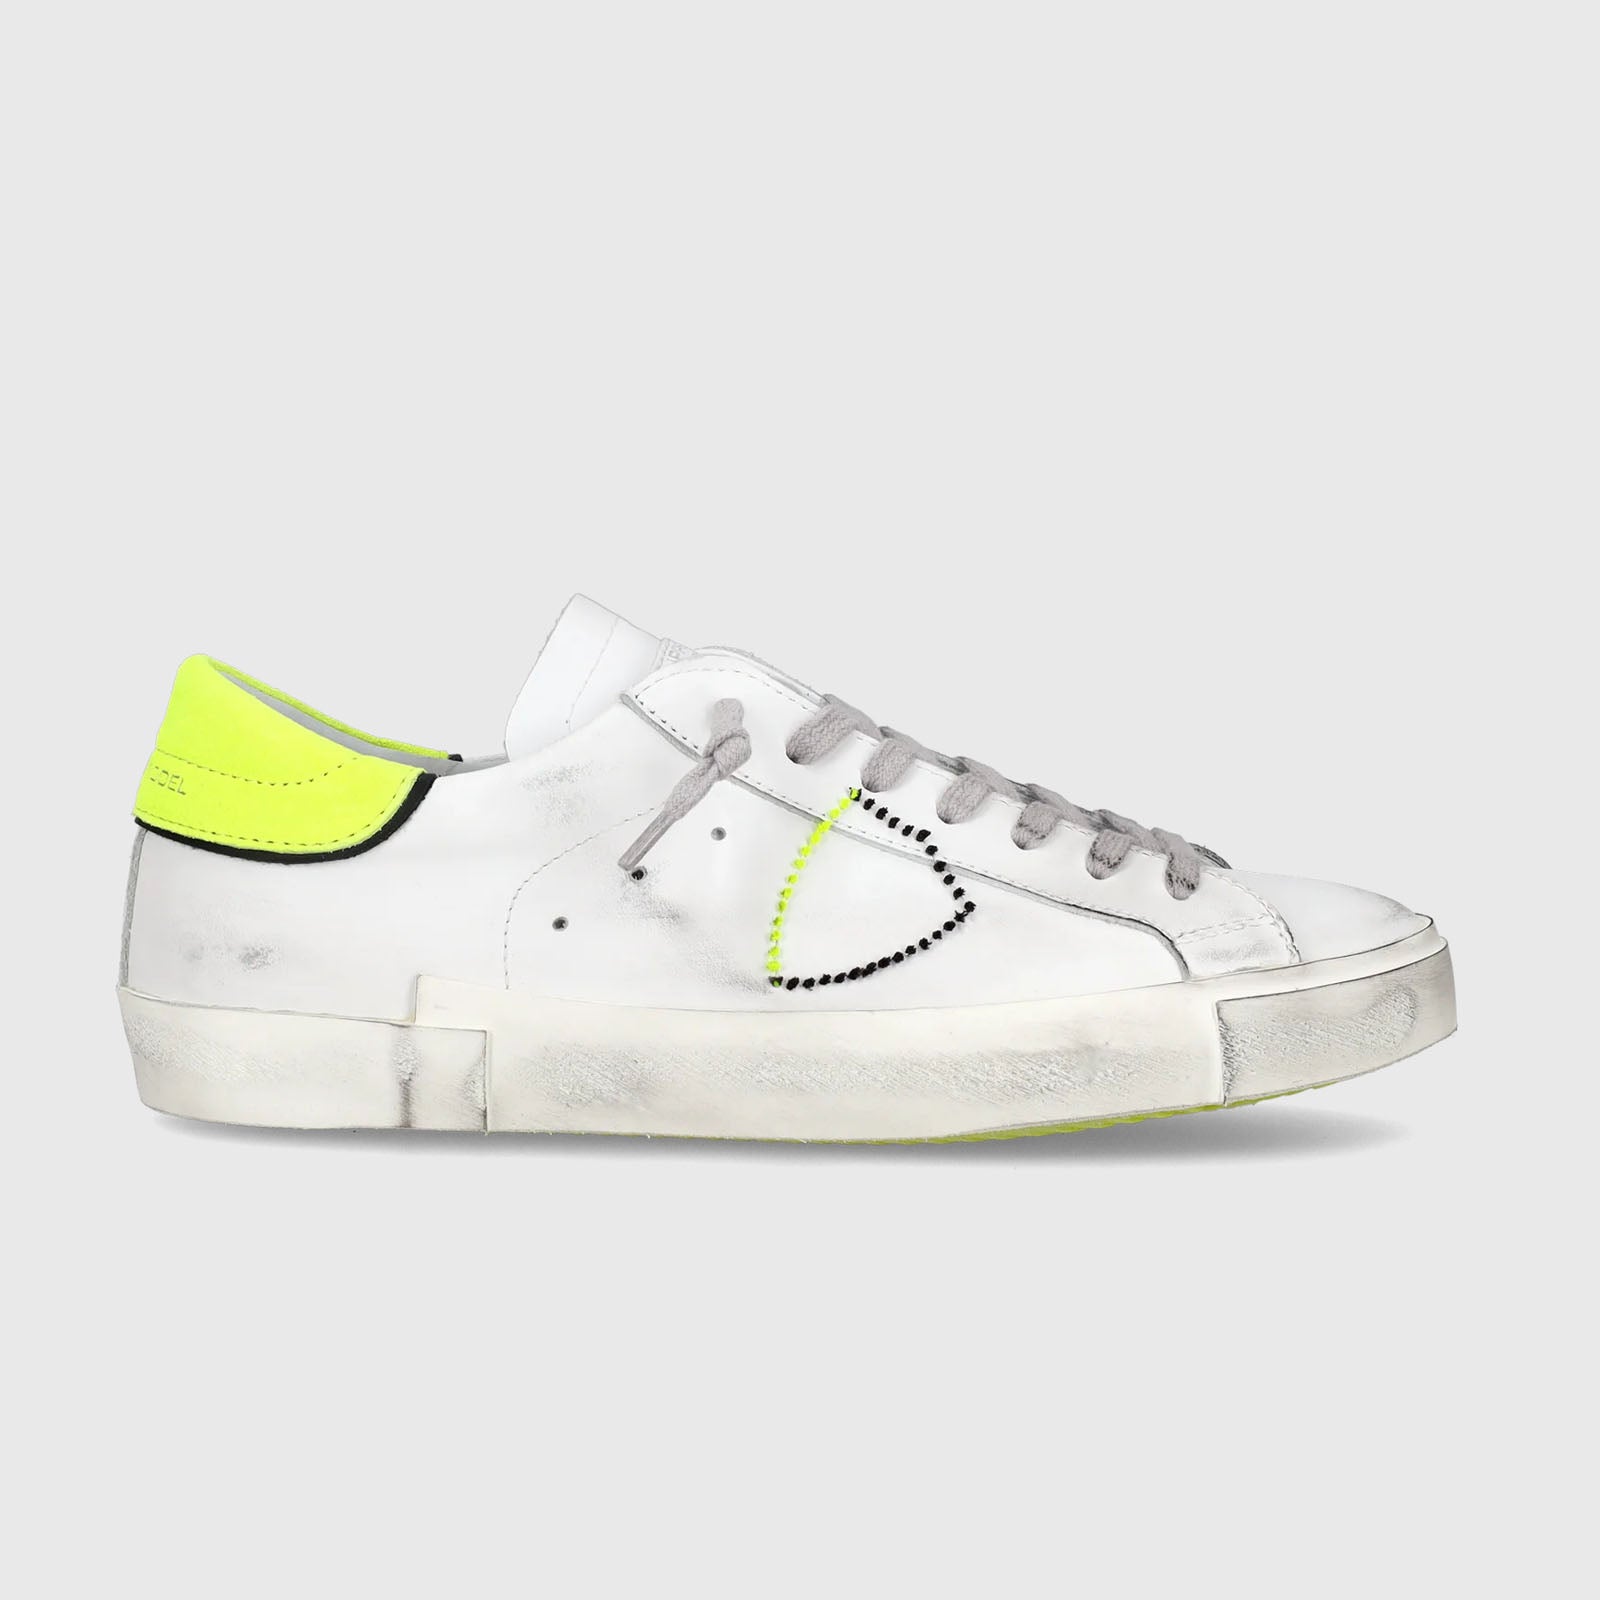 Philippe Model Sneakers PRSX Veau Broderie Pelle Bianco/Giallo Fluo - 7